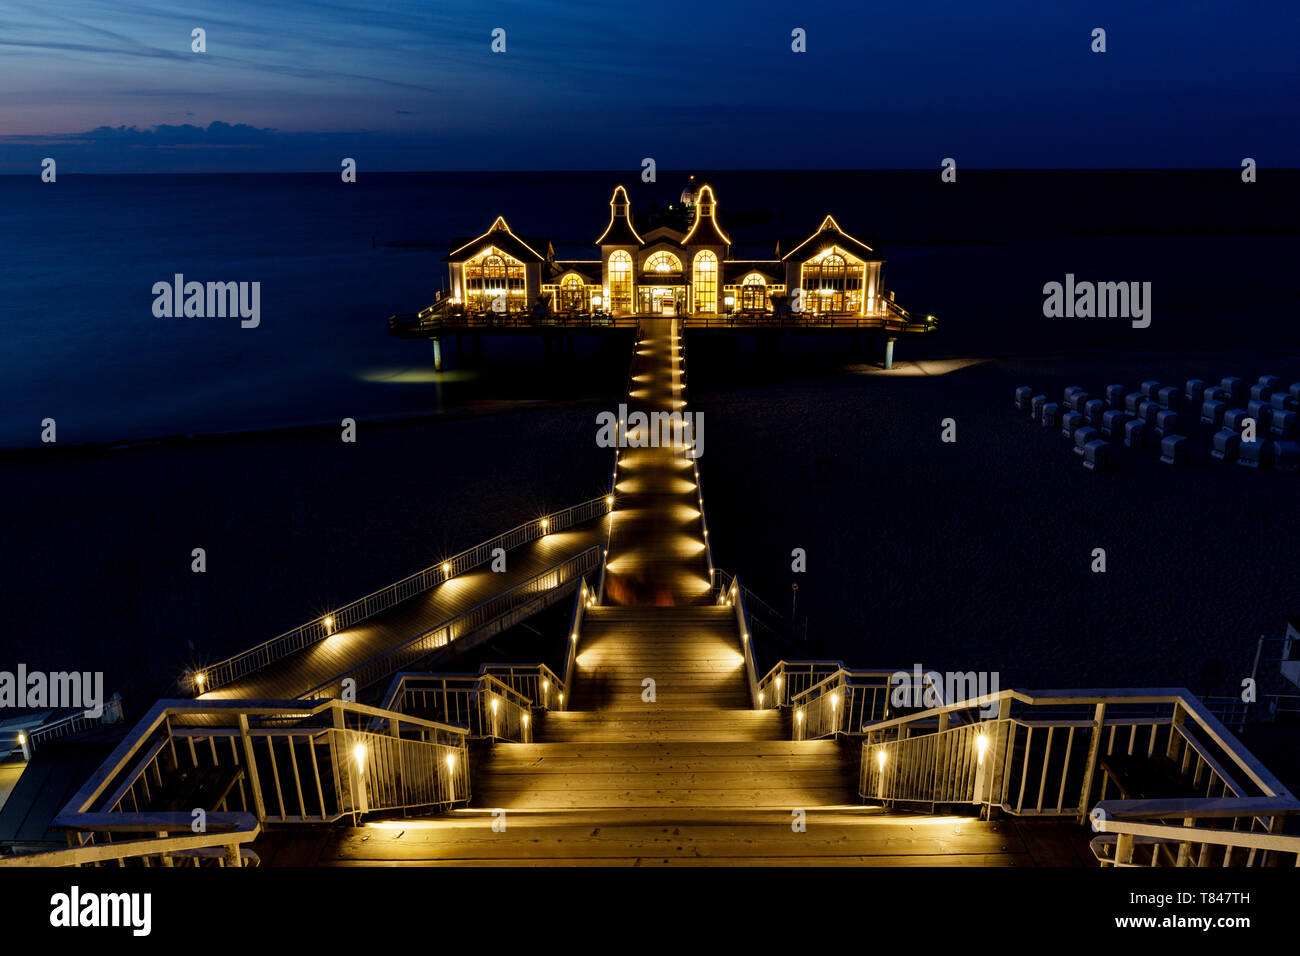 Traditional pier illuminated at night, elevated view, Sellin, Rugen, Mecklenburg-Vorpommern, Germany Stock Photo